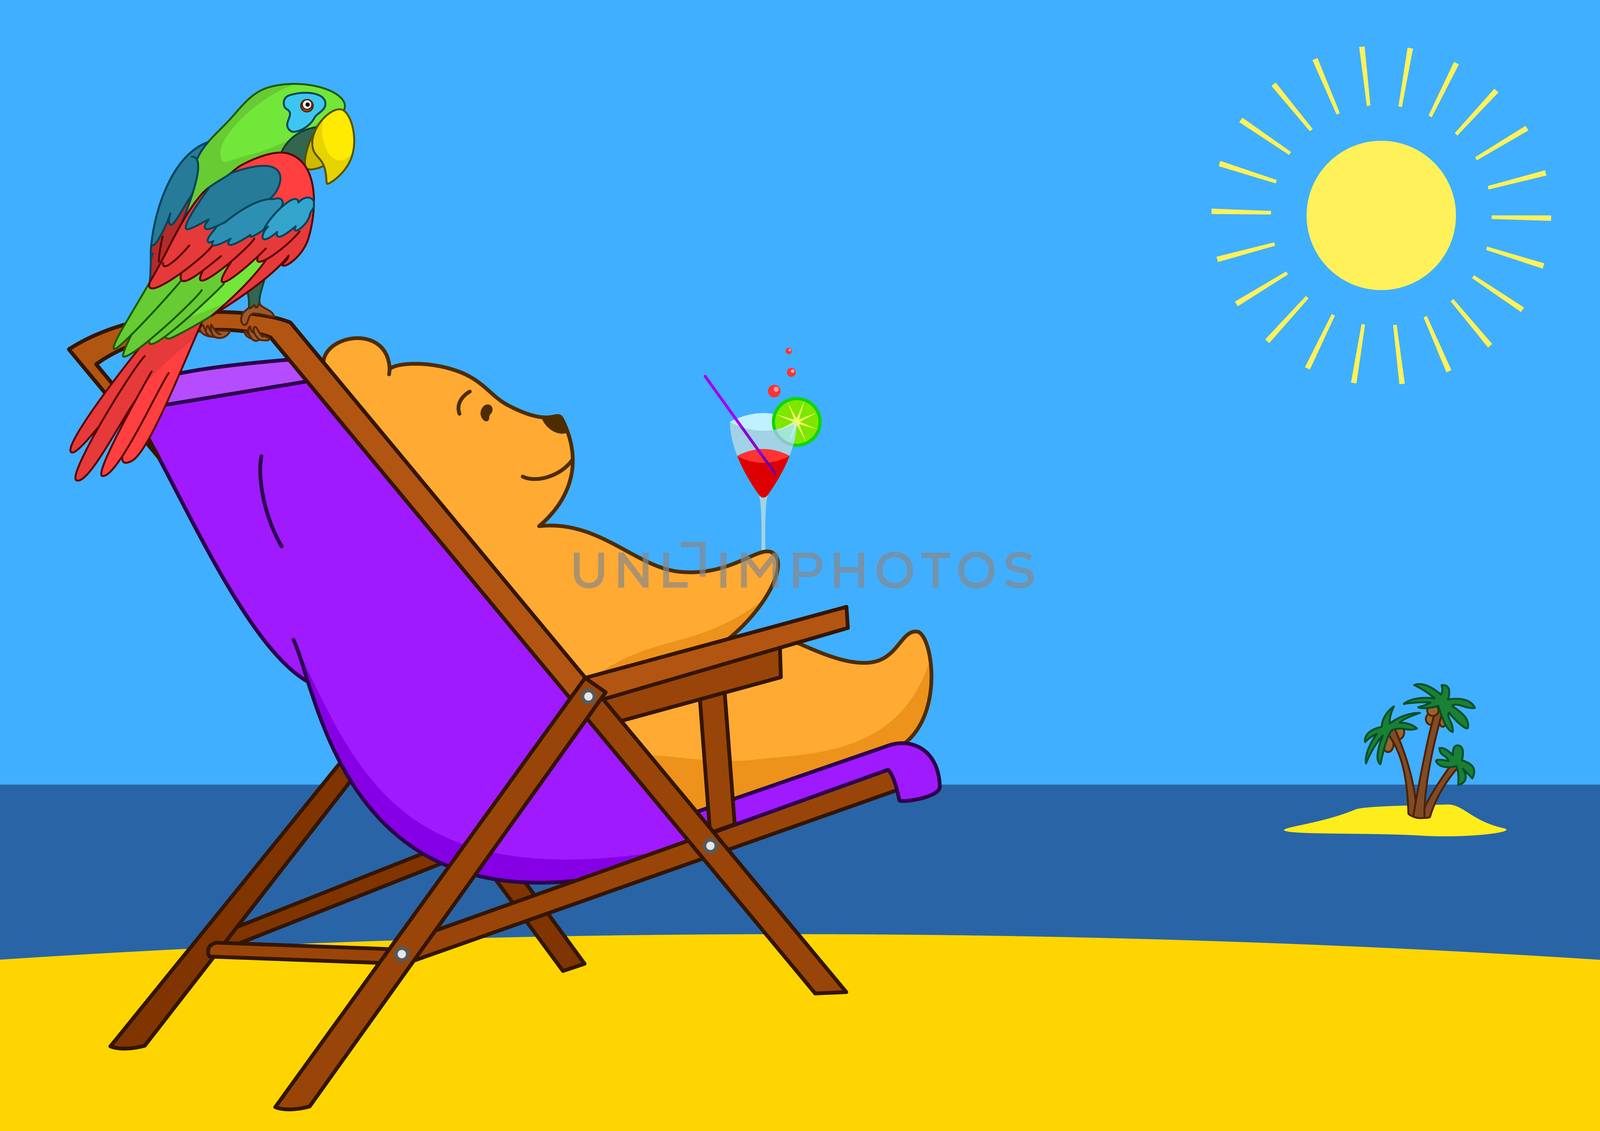 Teddy bear in a chaise lounge on a beach by alexcoolok